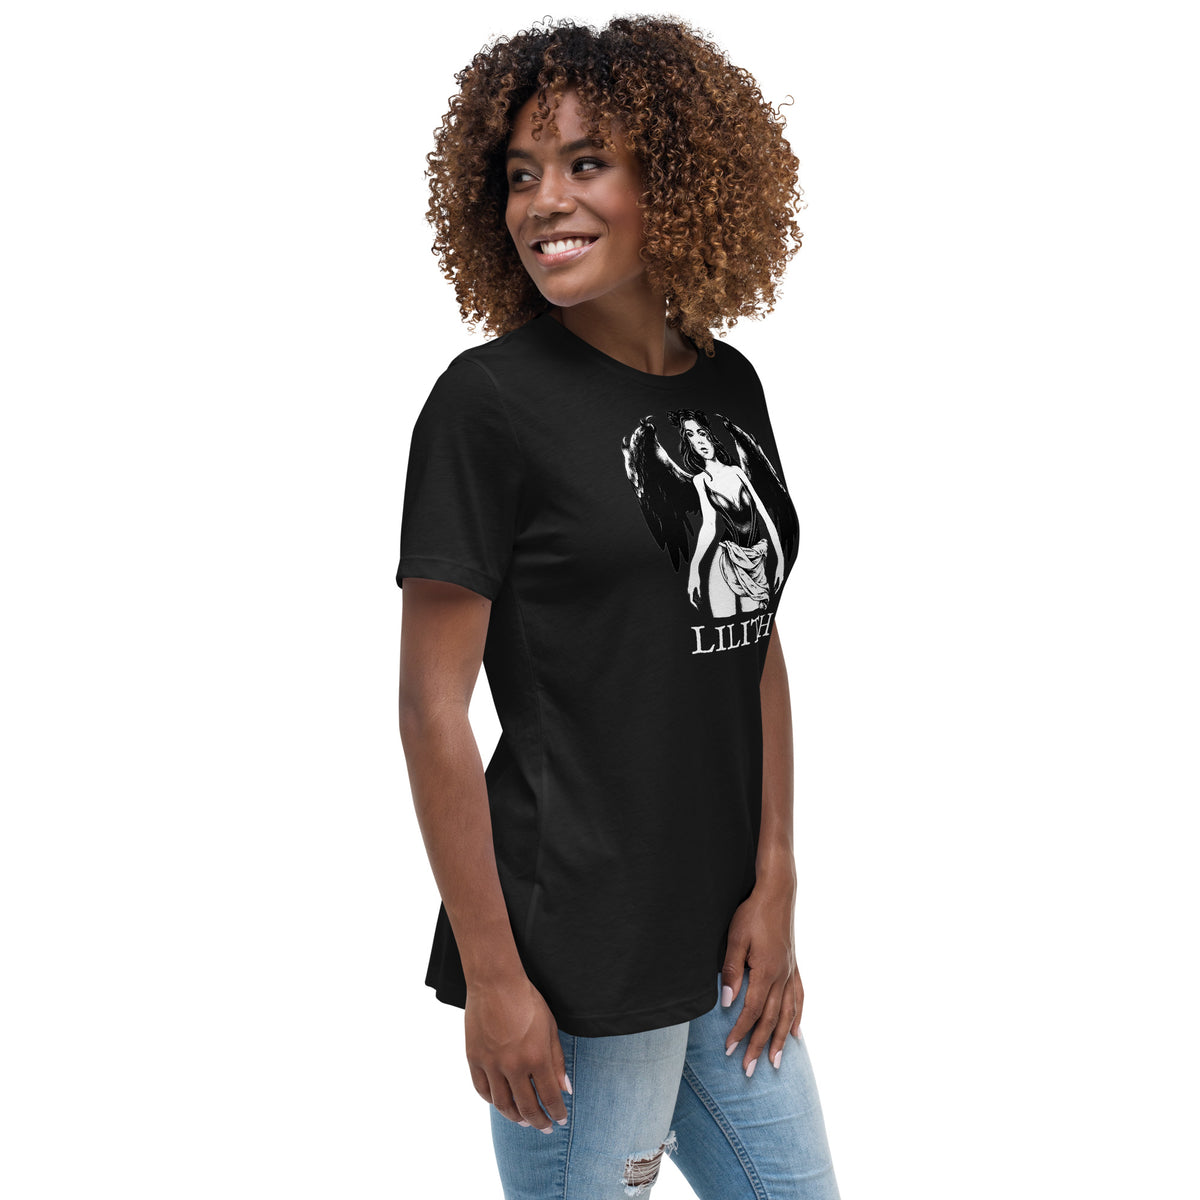 Lilith Women&#39;s Relaxed T-Shirt